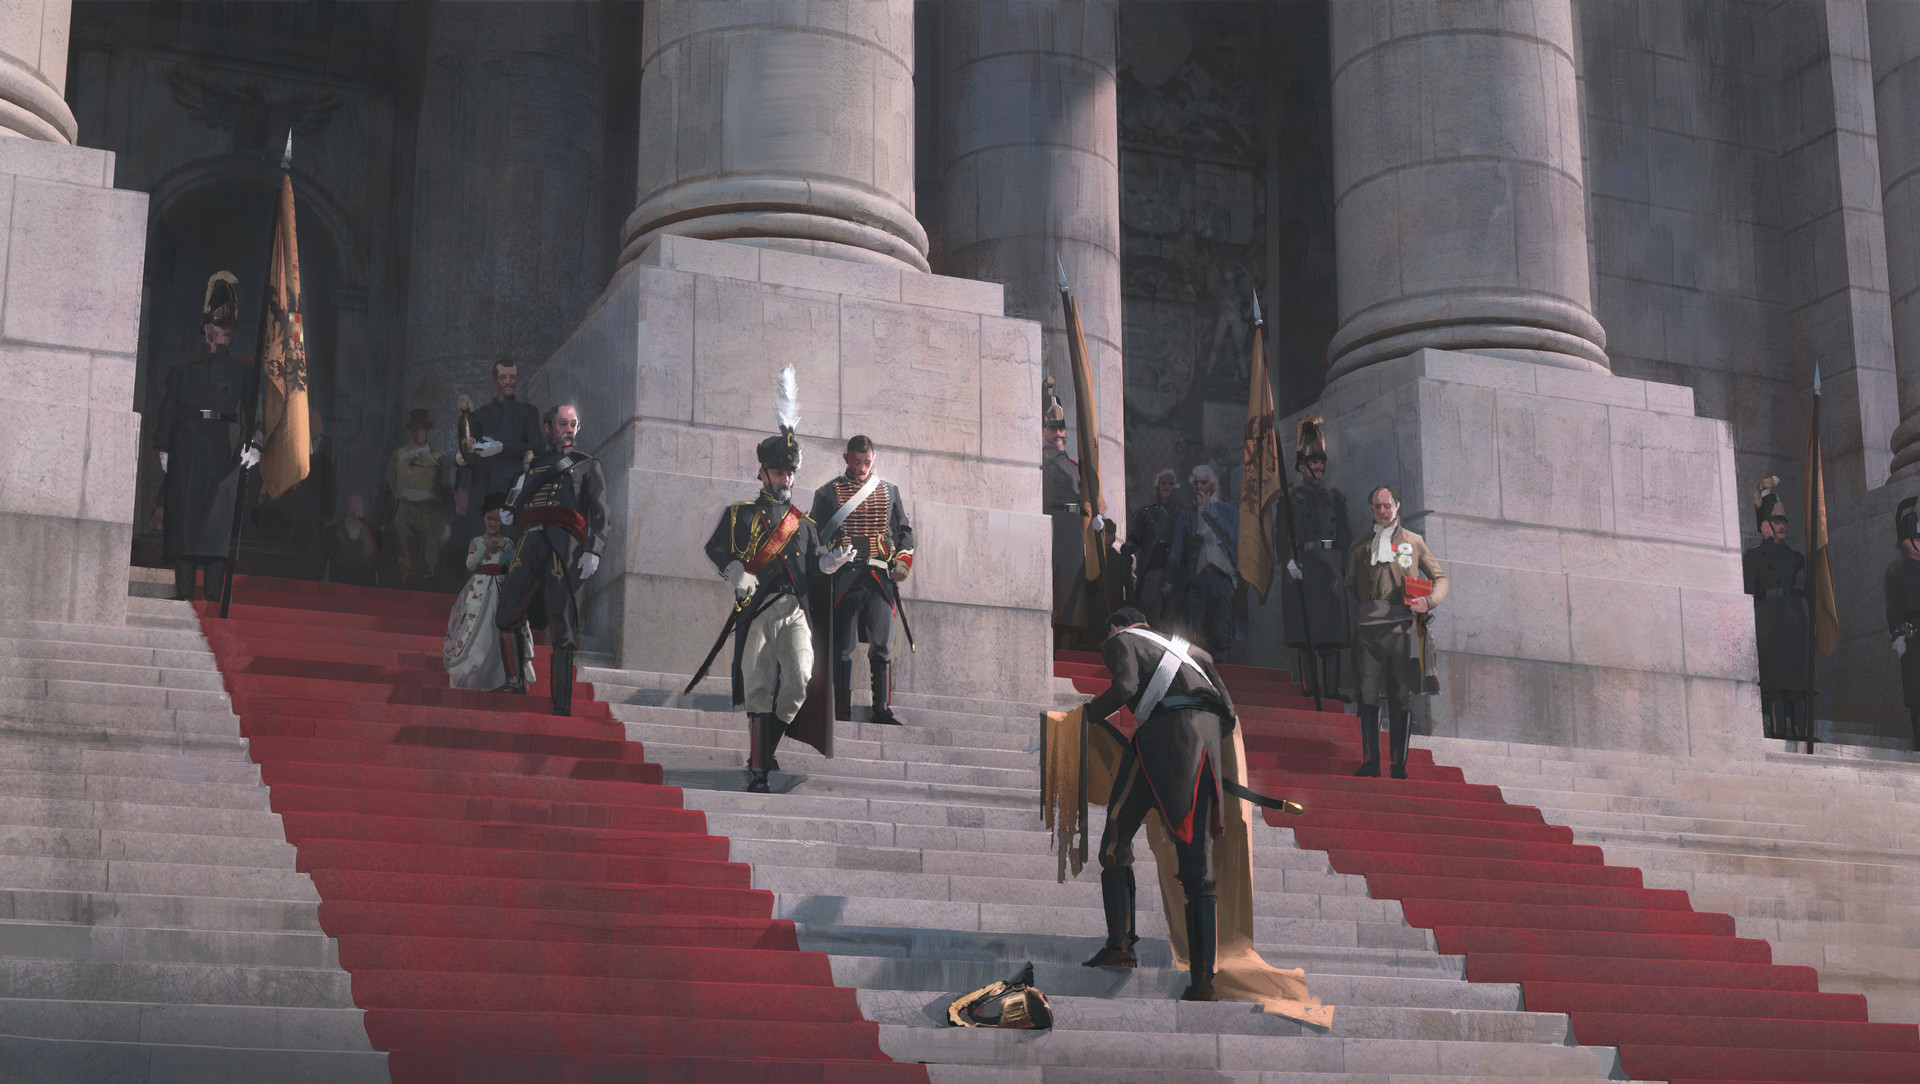 Nick Gindraux Digital Painting illsutration Loss after the battle of Austerlitz 